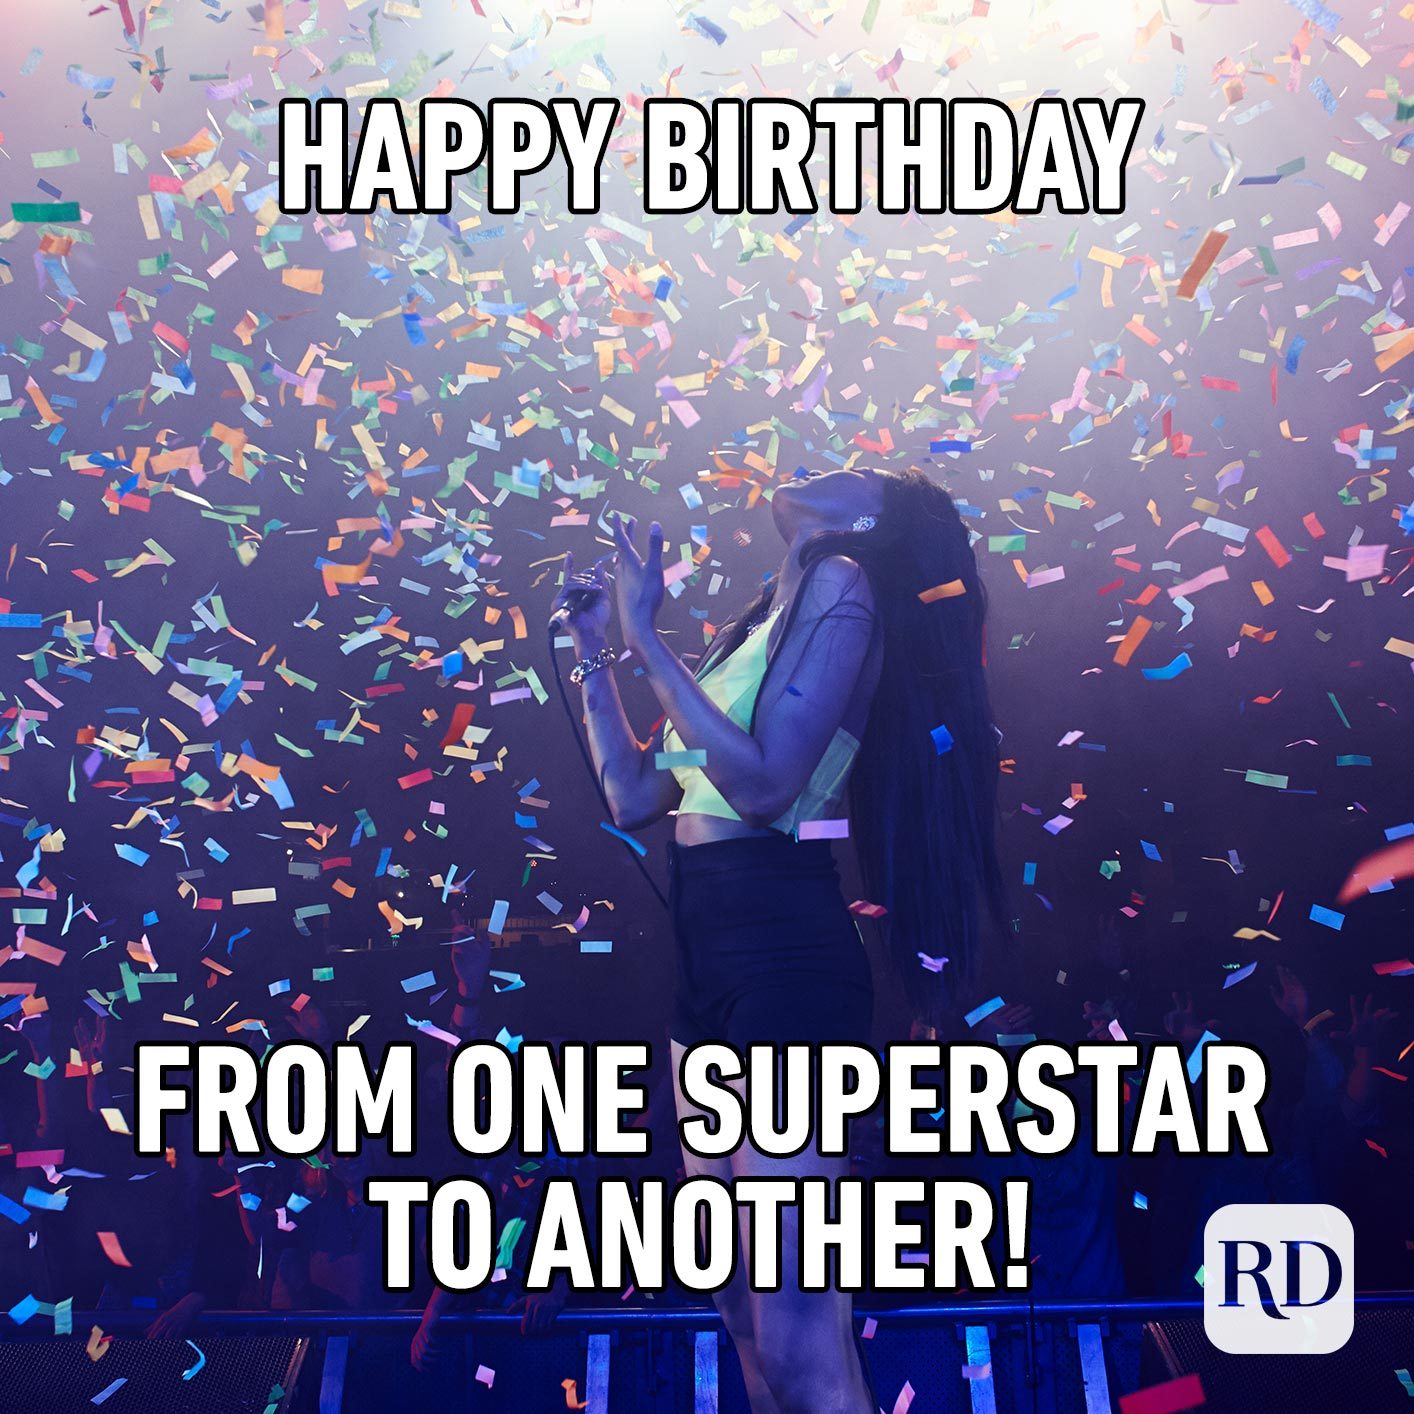 Happy Birthday from one superstar to another!